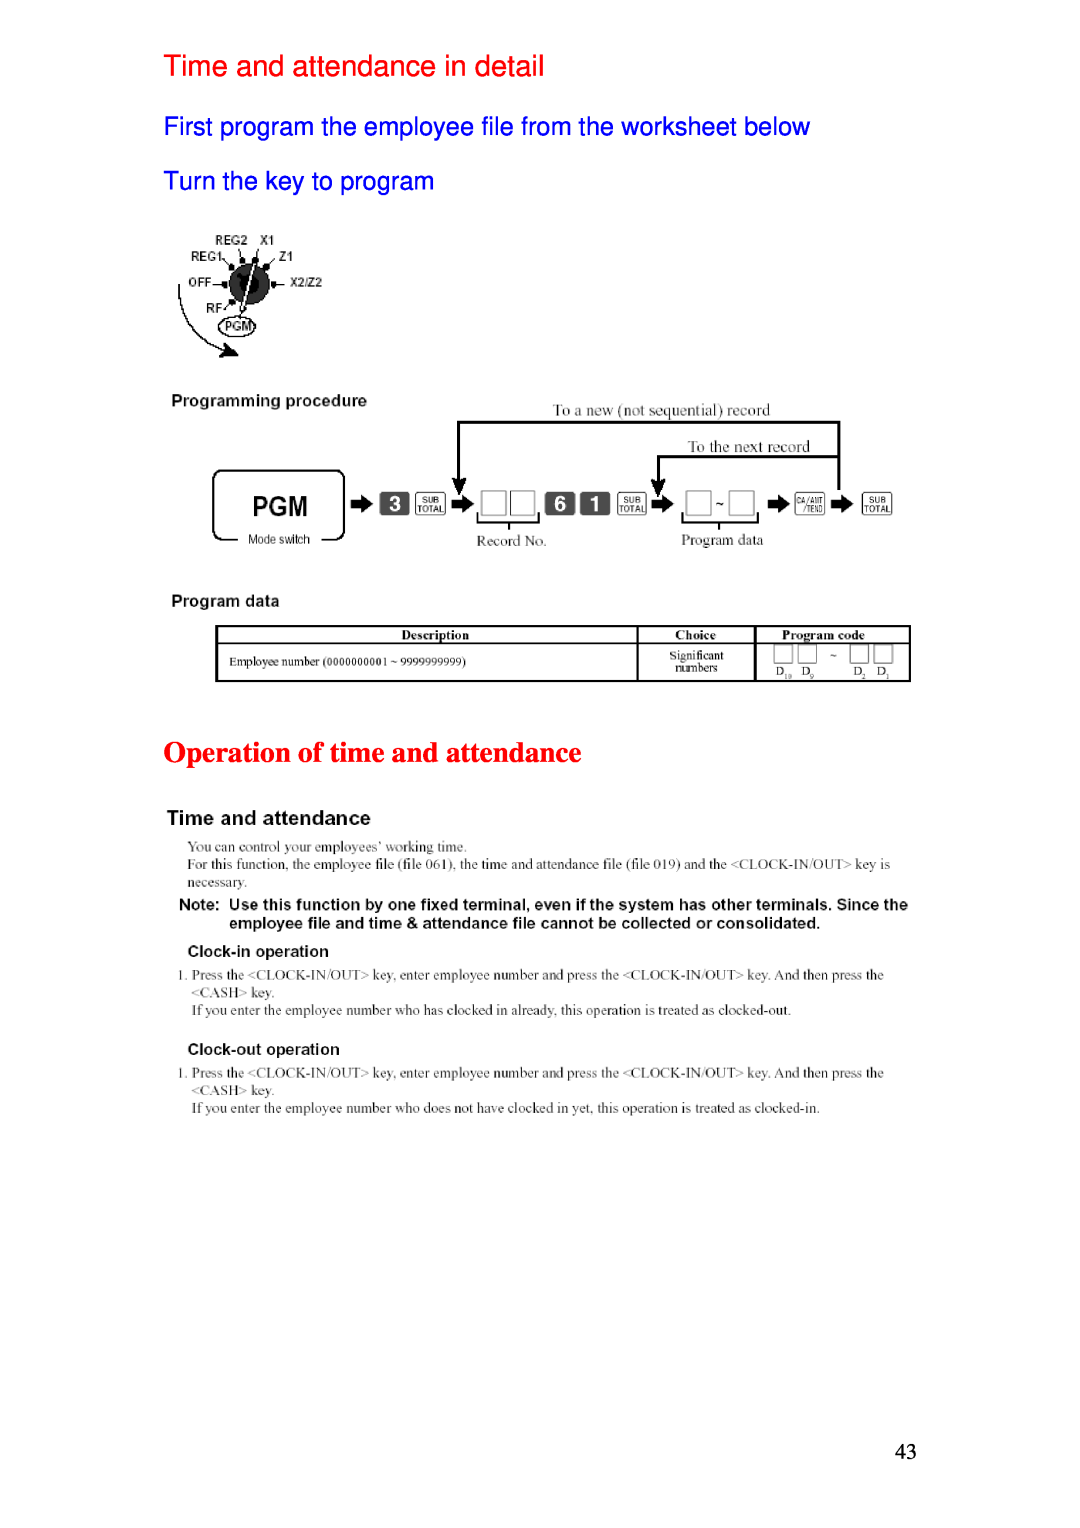 Delta TE-4000 manual Time and attendance in detail, Operation of time and attendance, Turn the key to program 